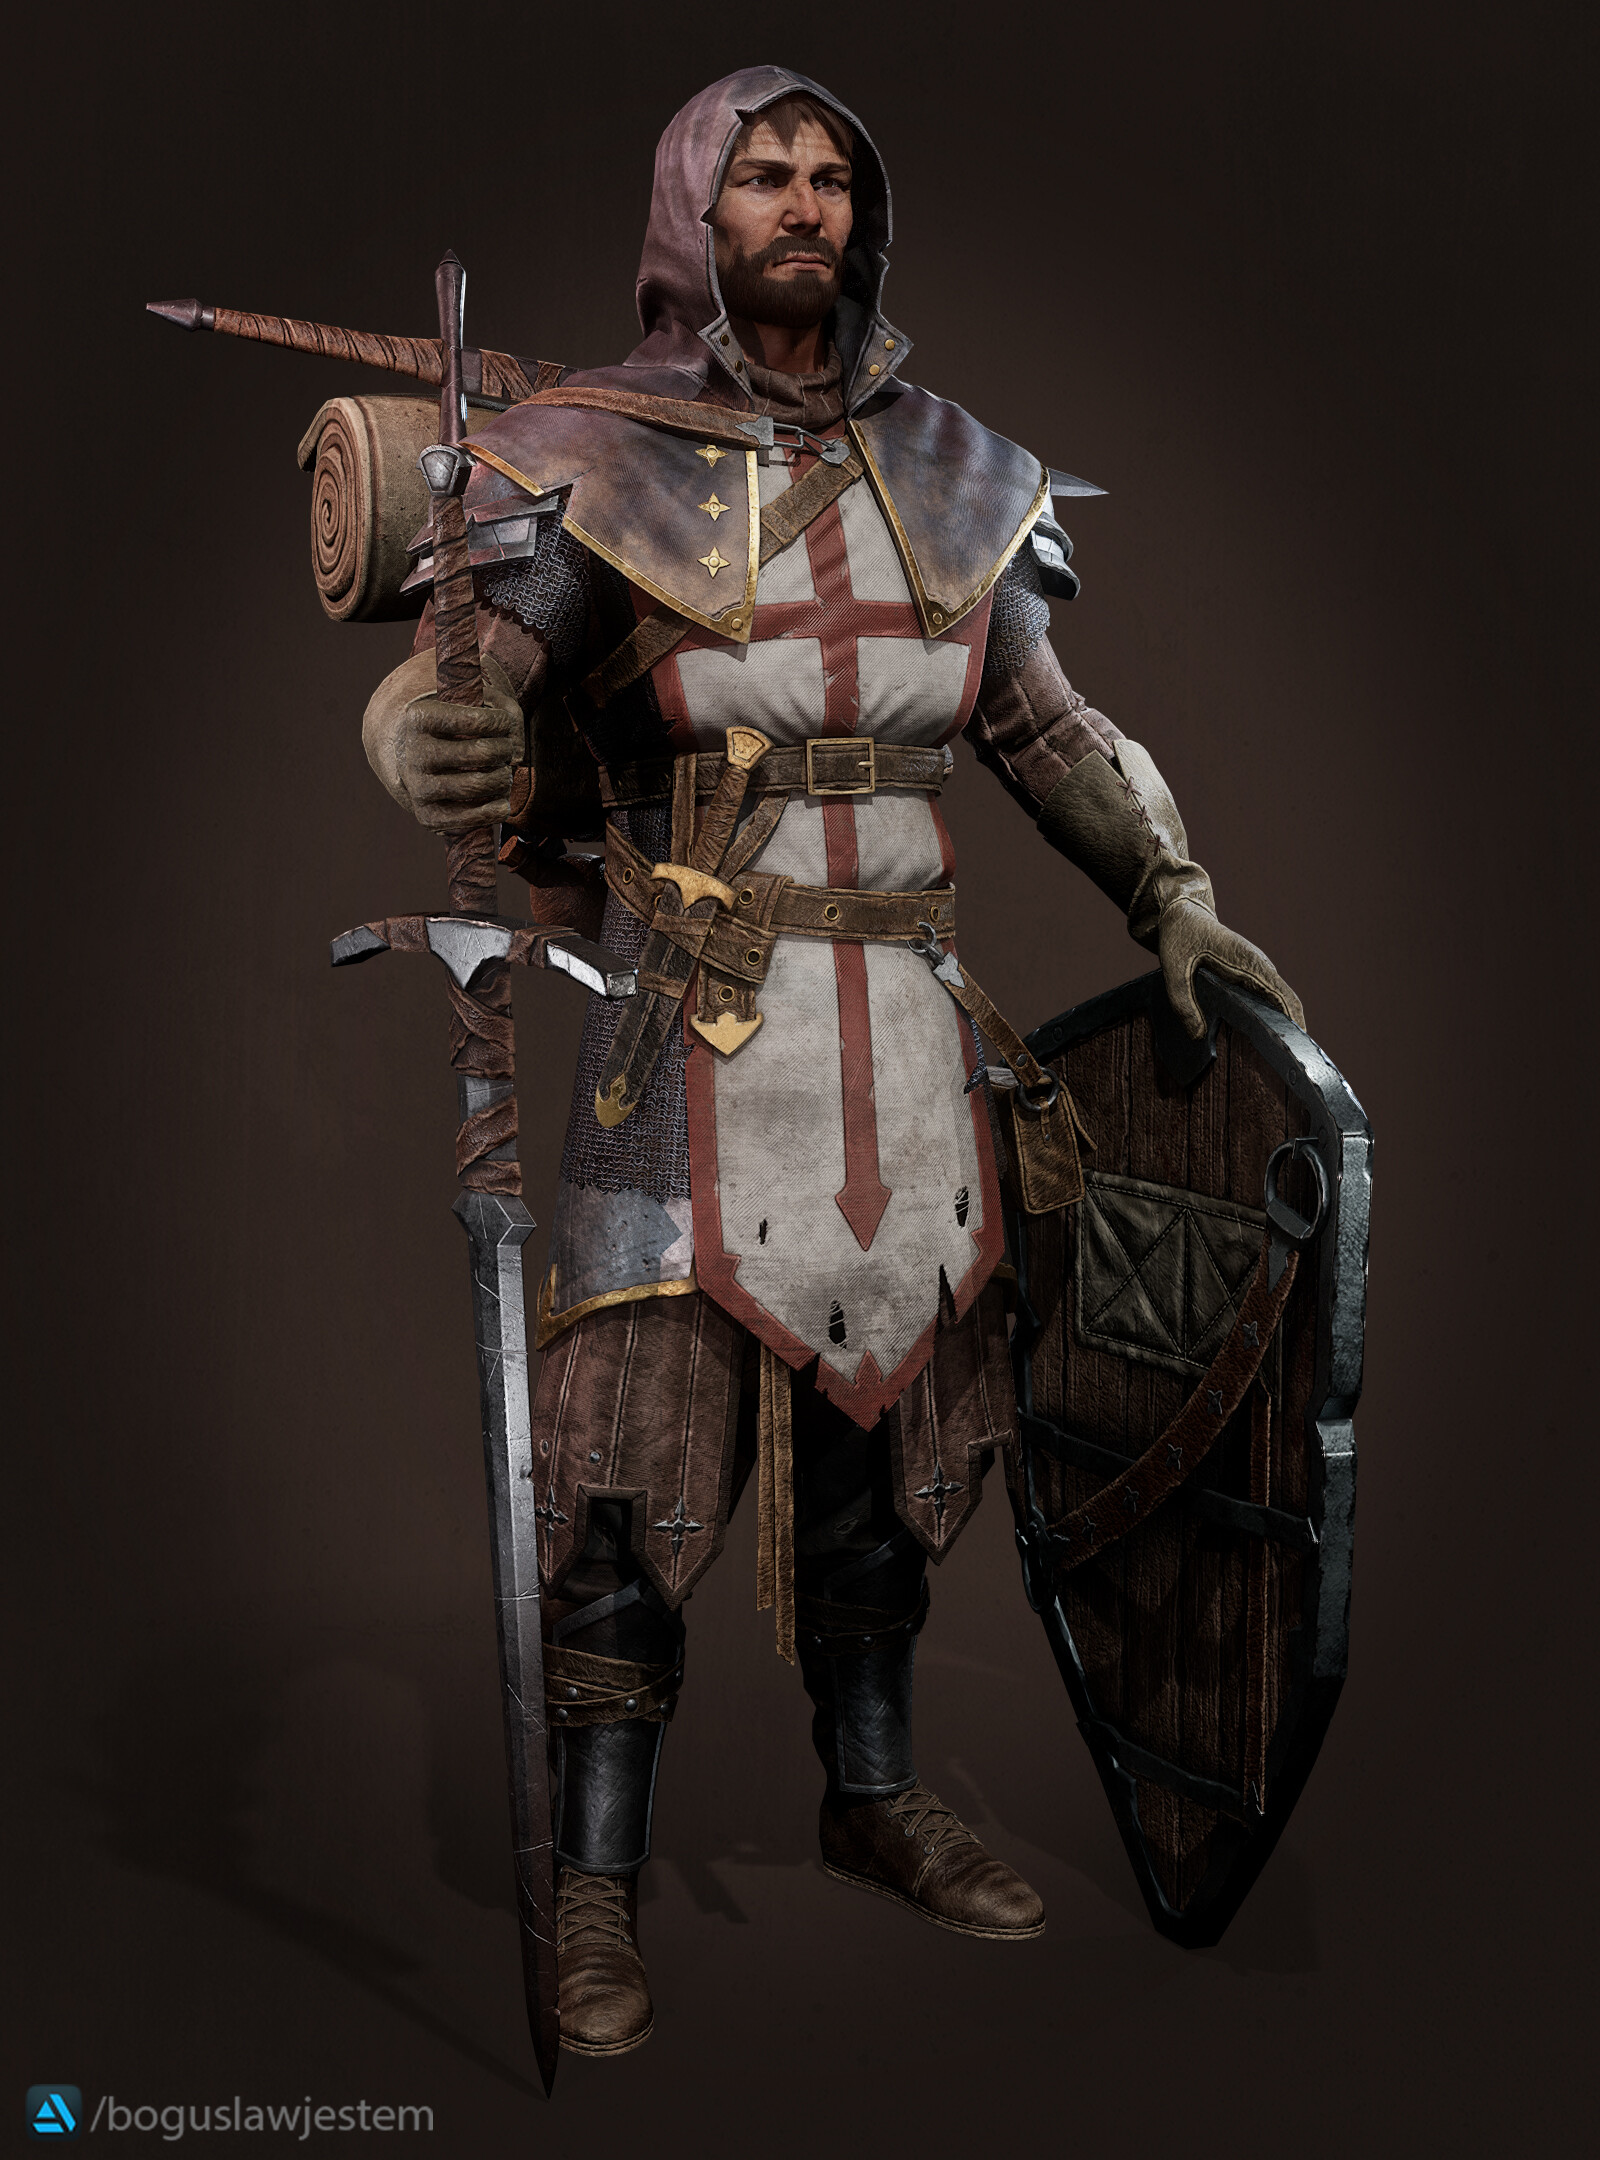 wandering knight of the netherlands